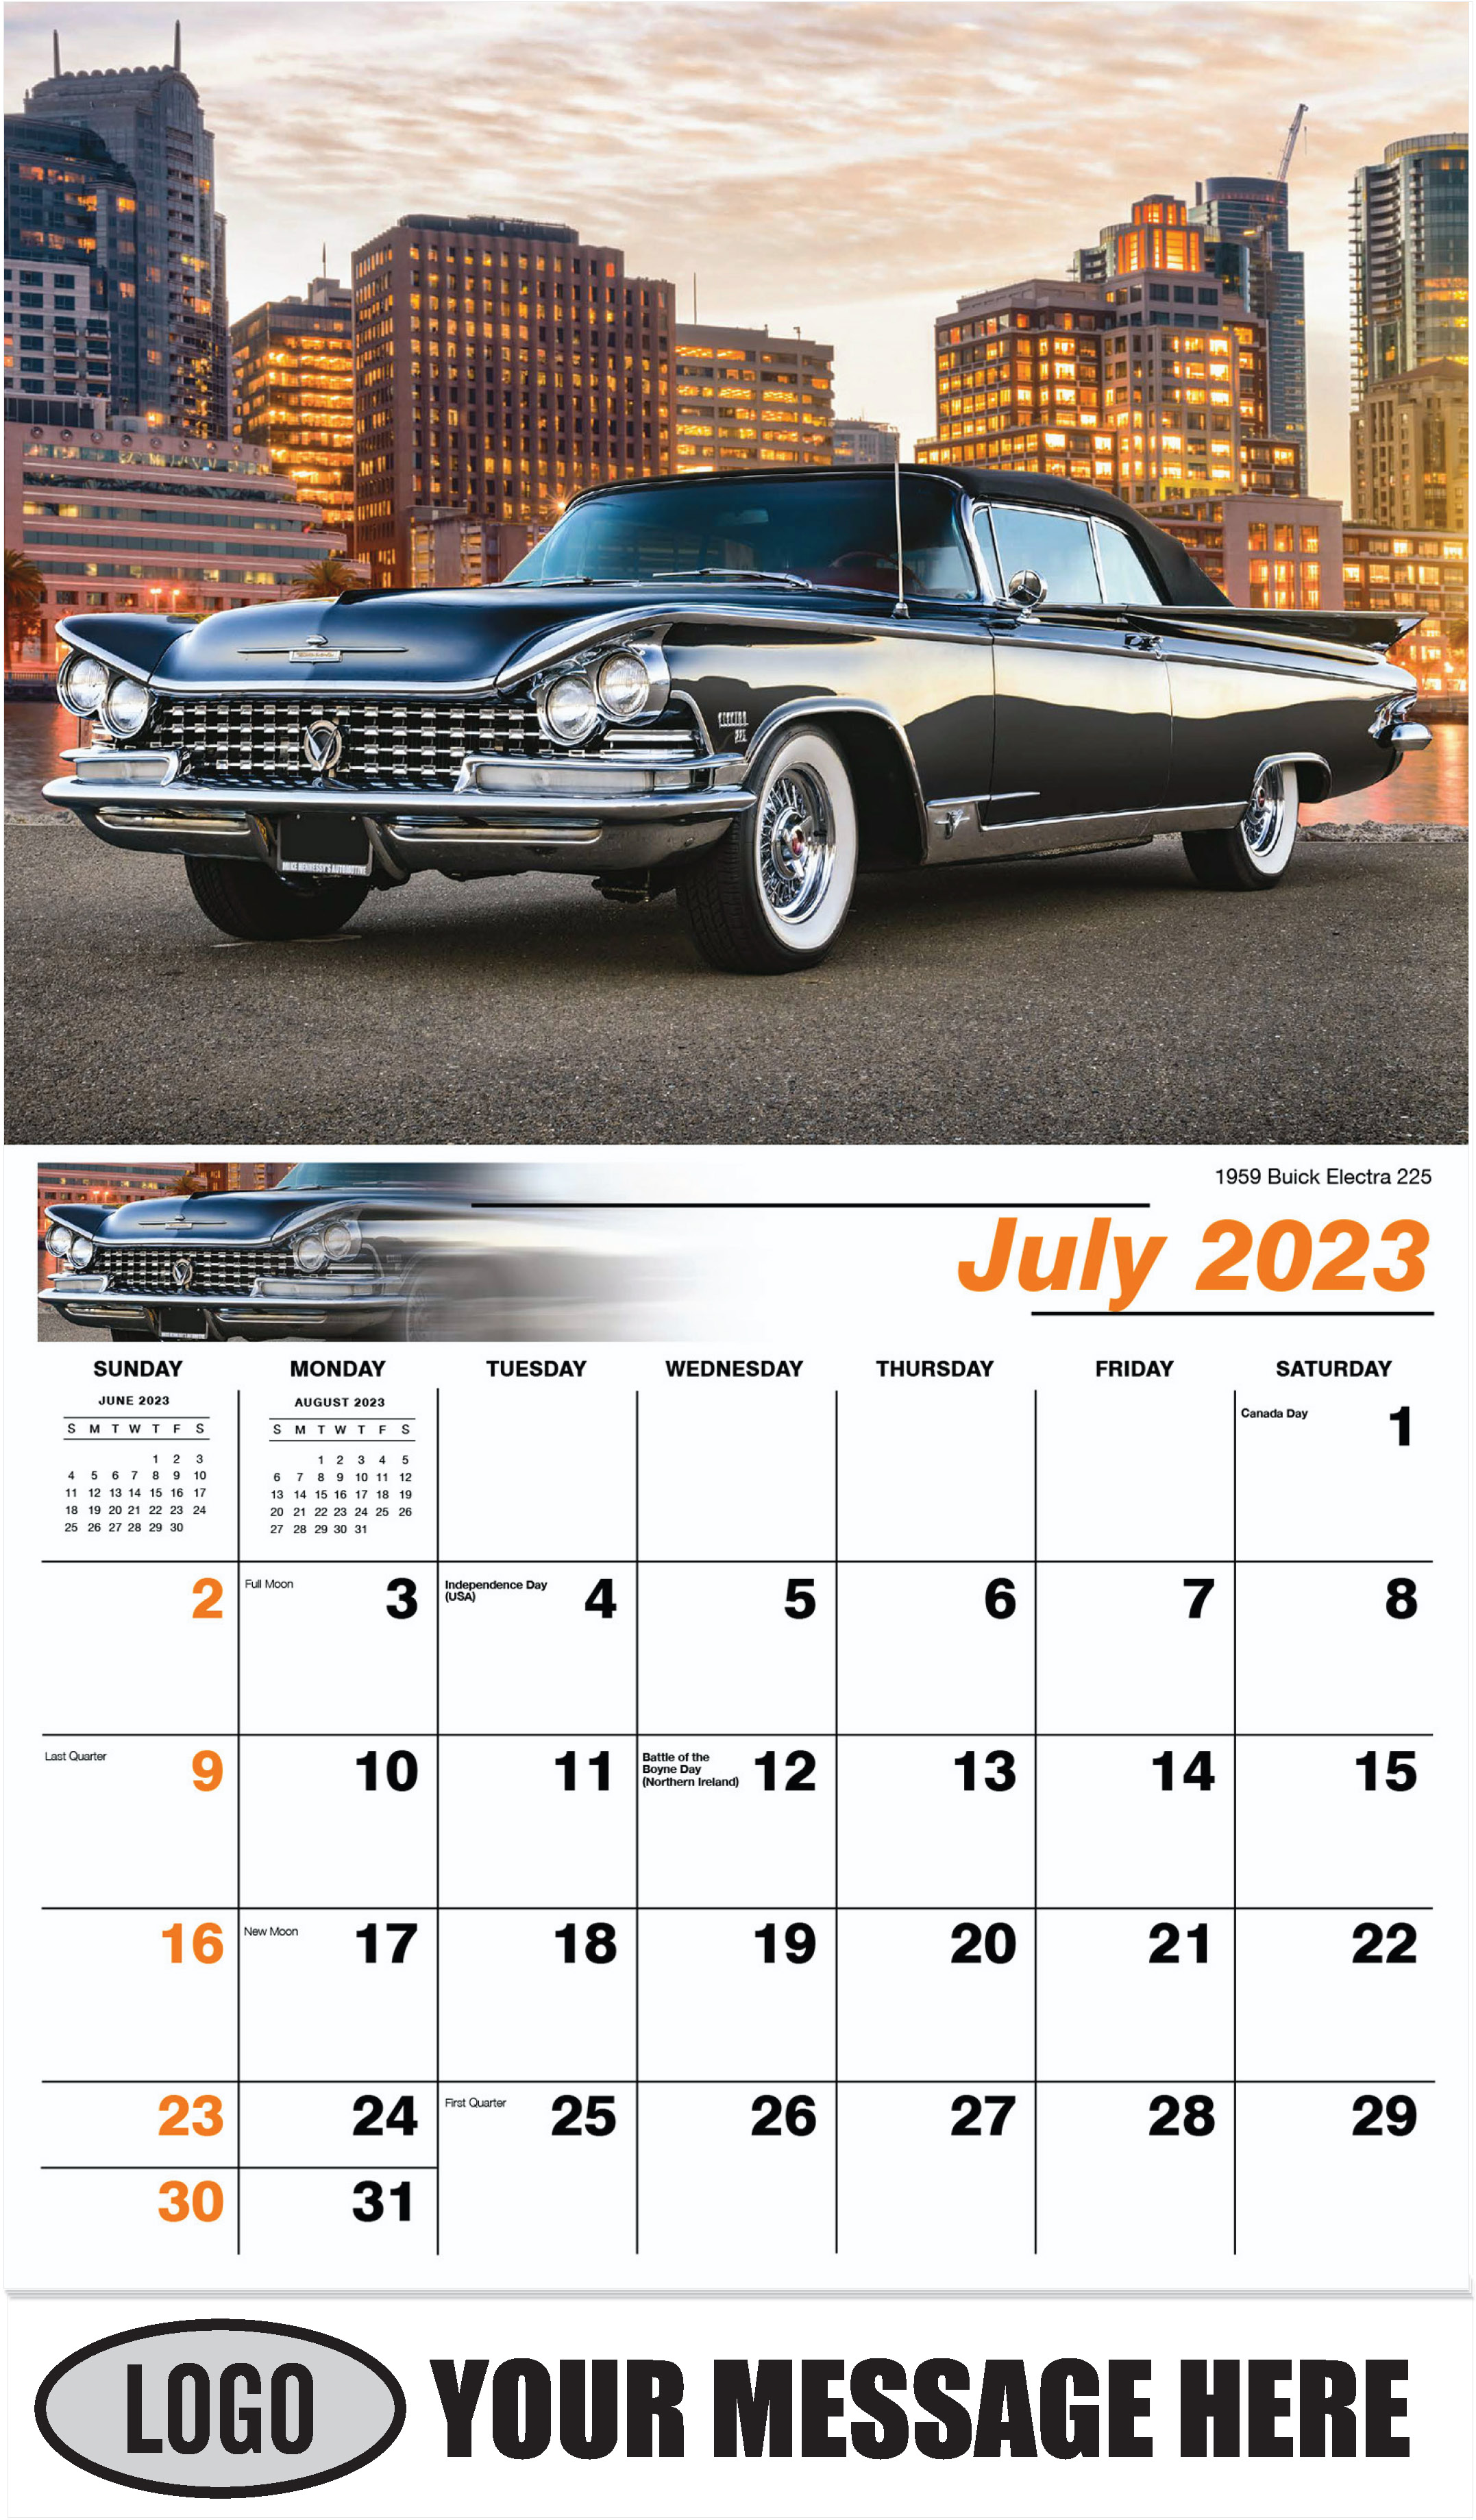 1959 Buick Electra 225 - July - Classic Cars 2023 Promotional Calendar